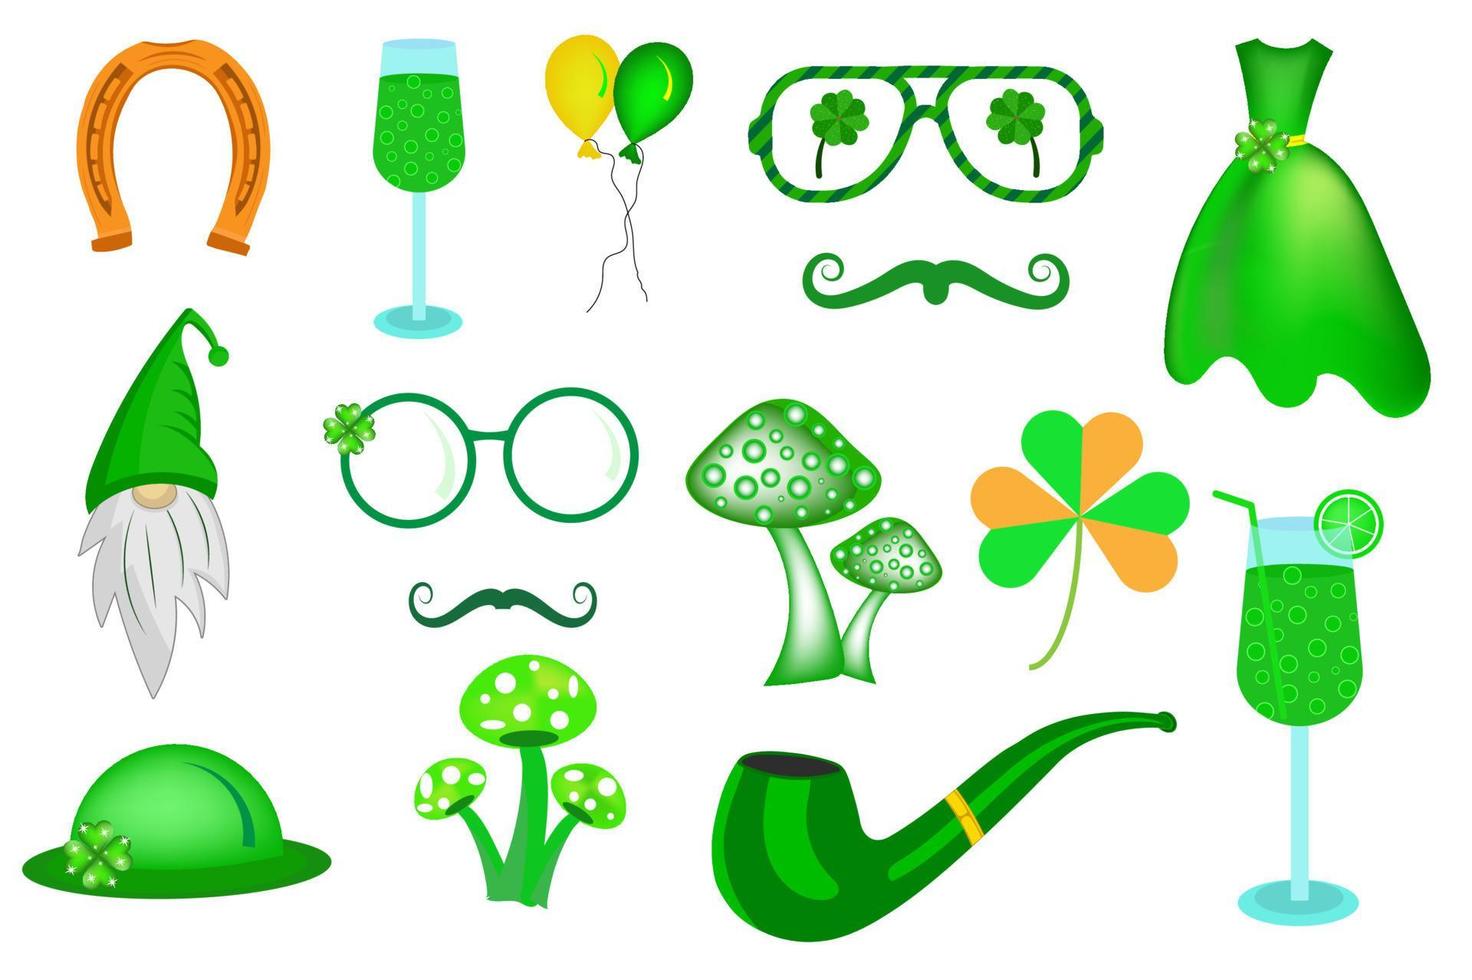 St Patrick's Day element vector set. Saint Patrick's smoking pipe, horseshoe, eyeglass, clover, Green hat, mashroom, Beer glass, GNome, and balloon vector